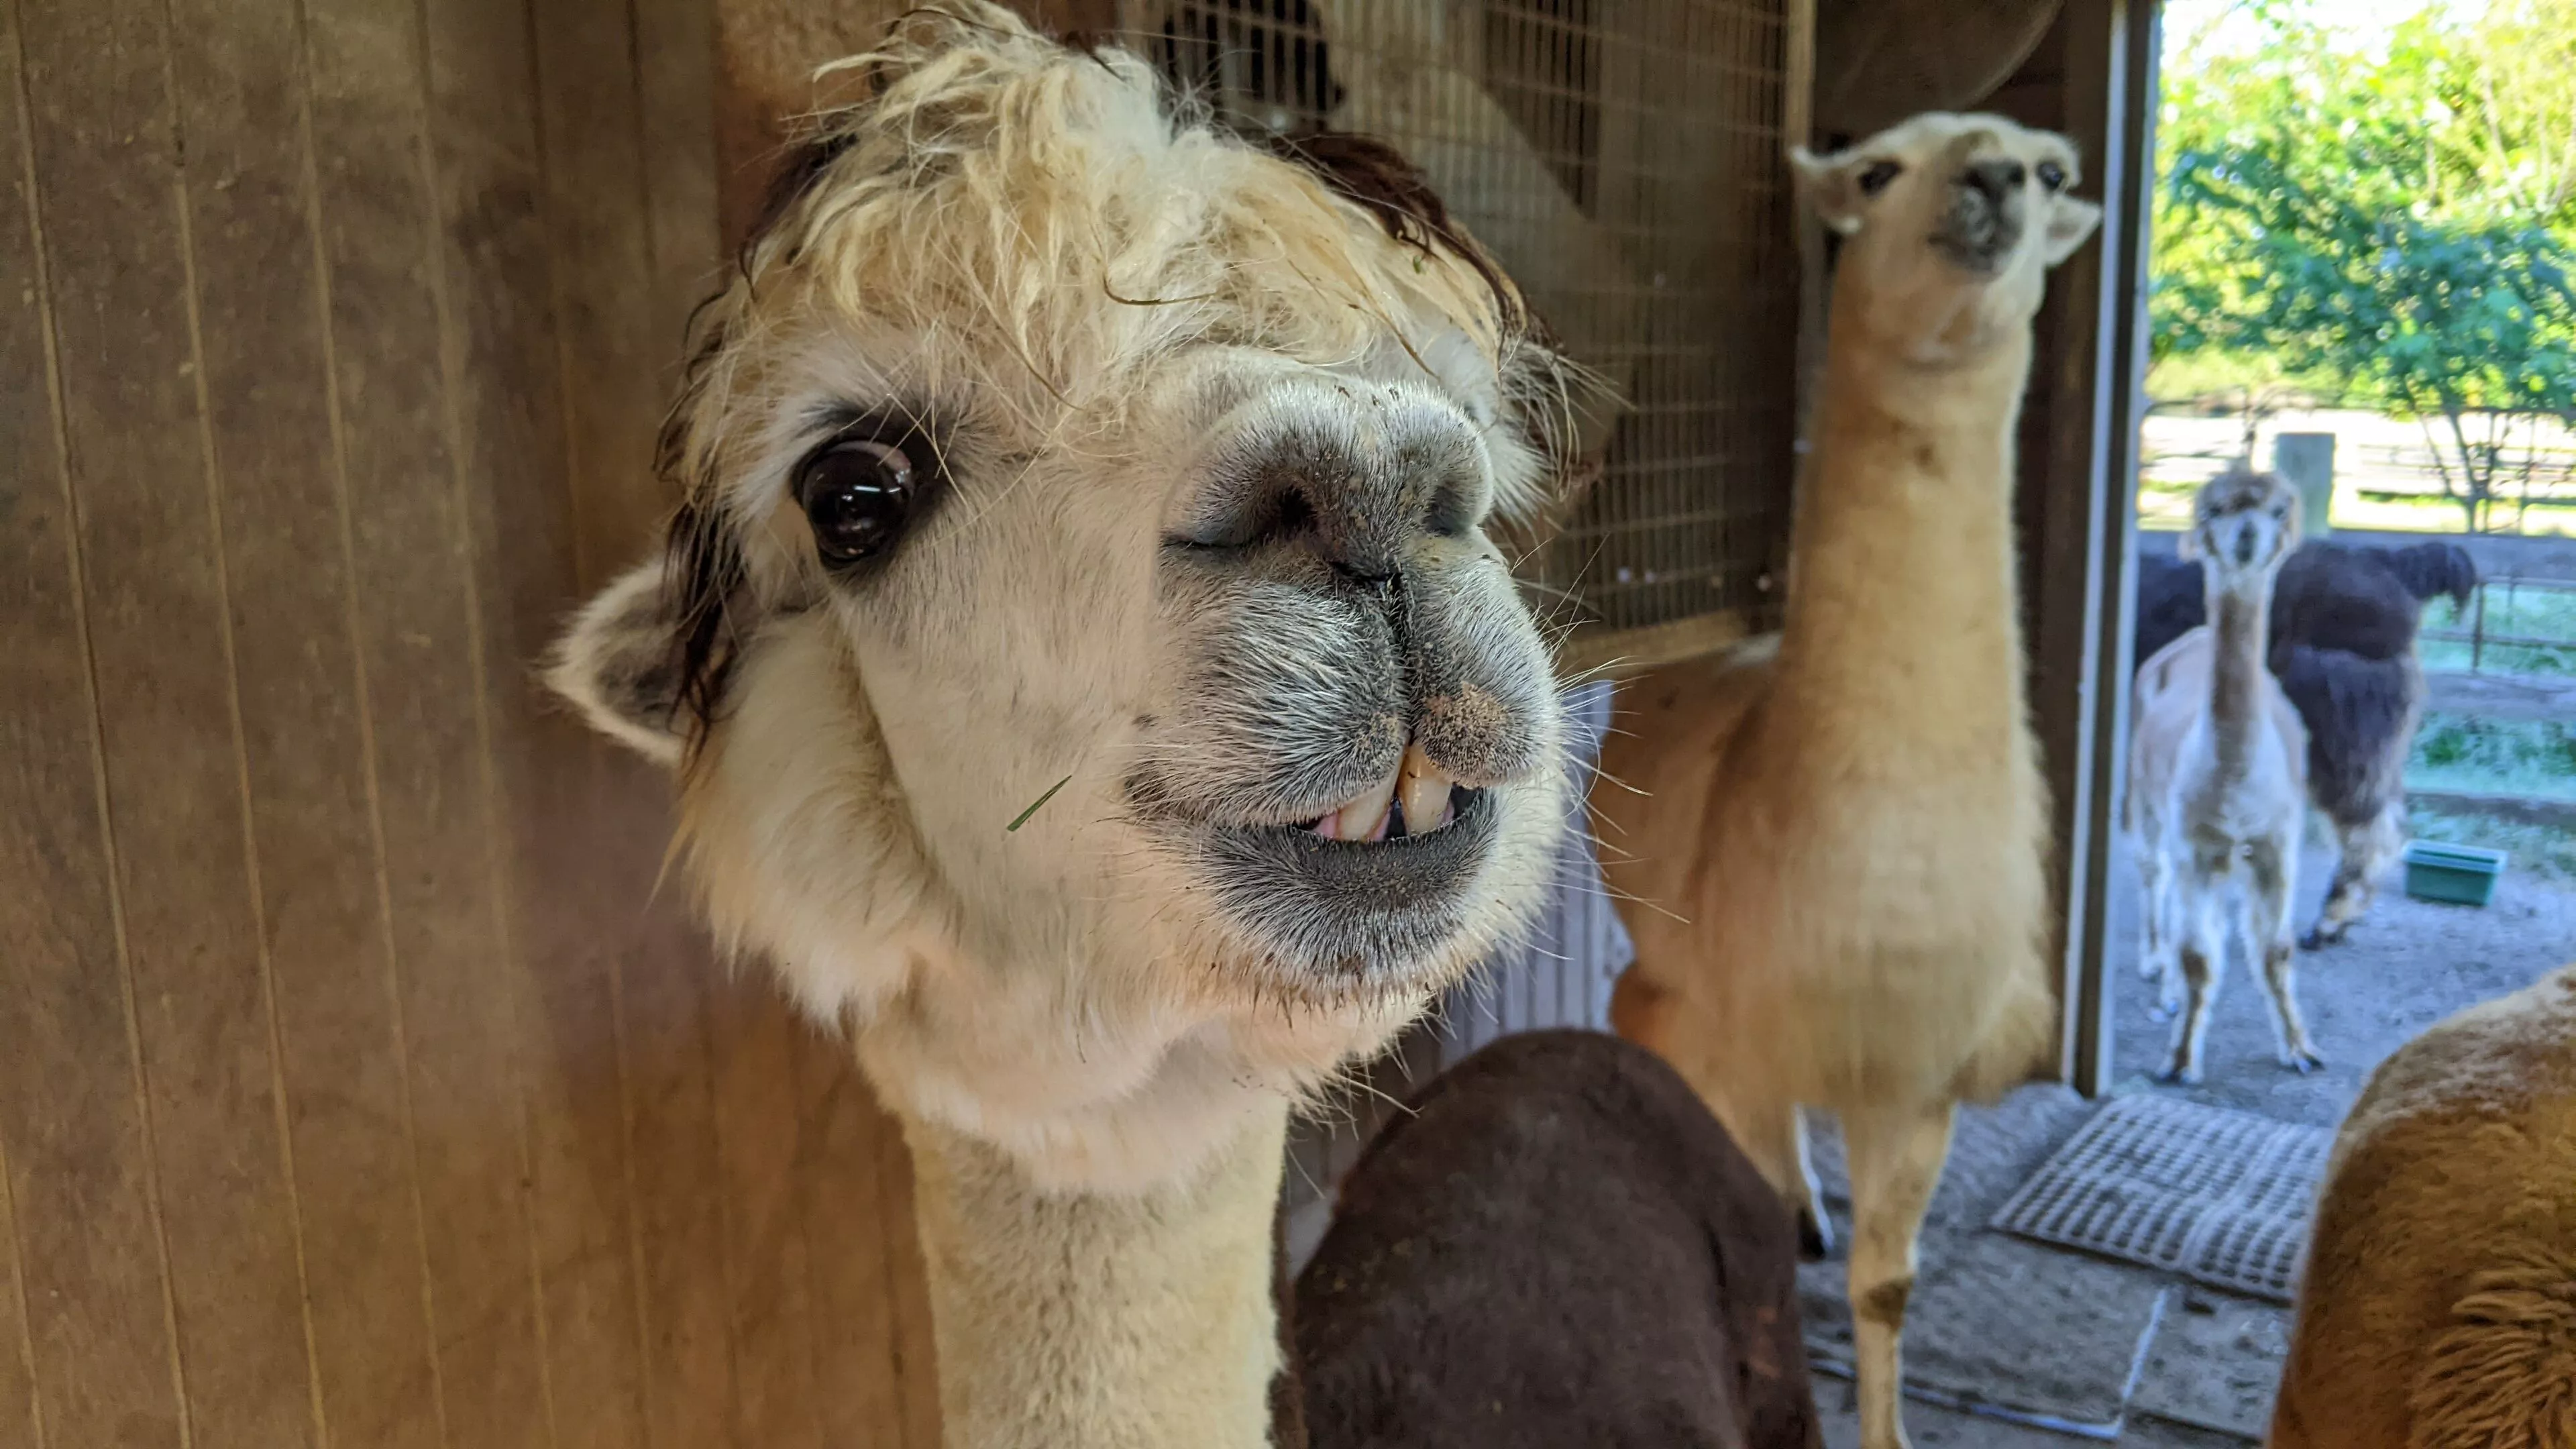 An image of an alpaca named Lacy